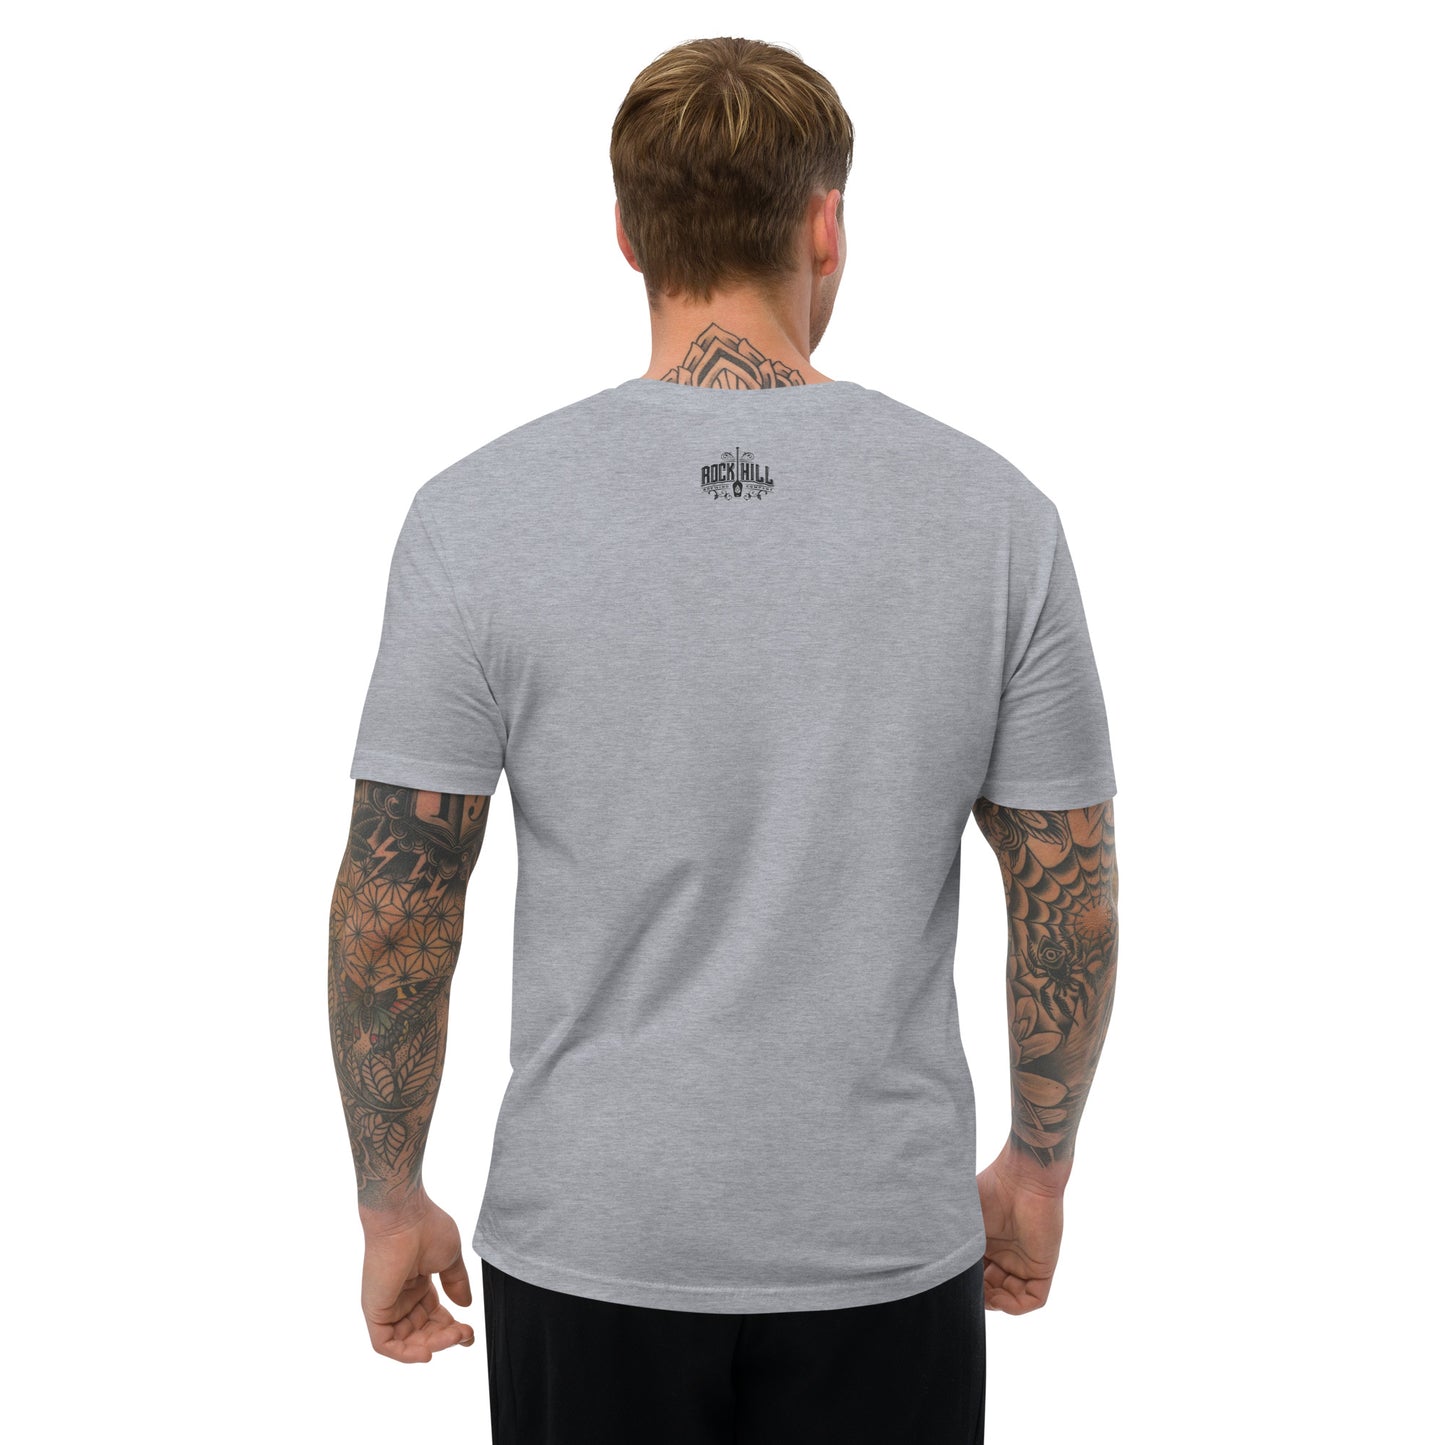 Rock Hill Brewing SYF Tee